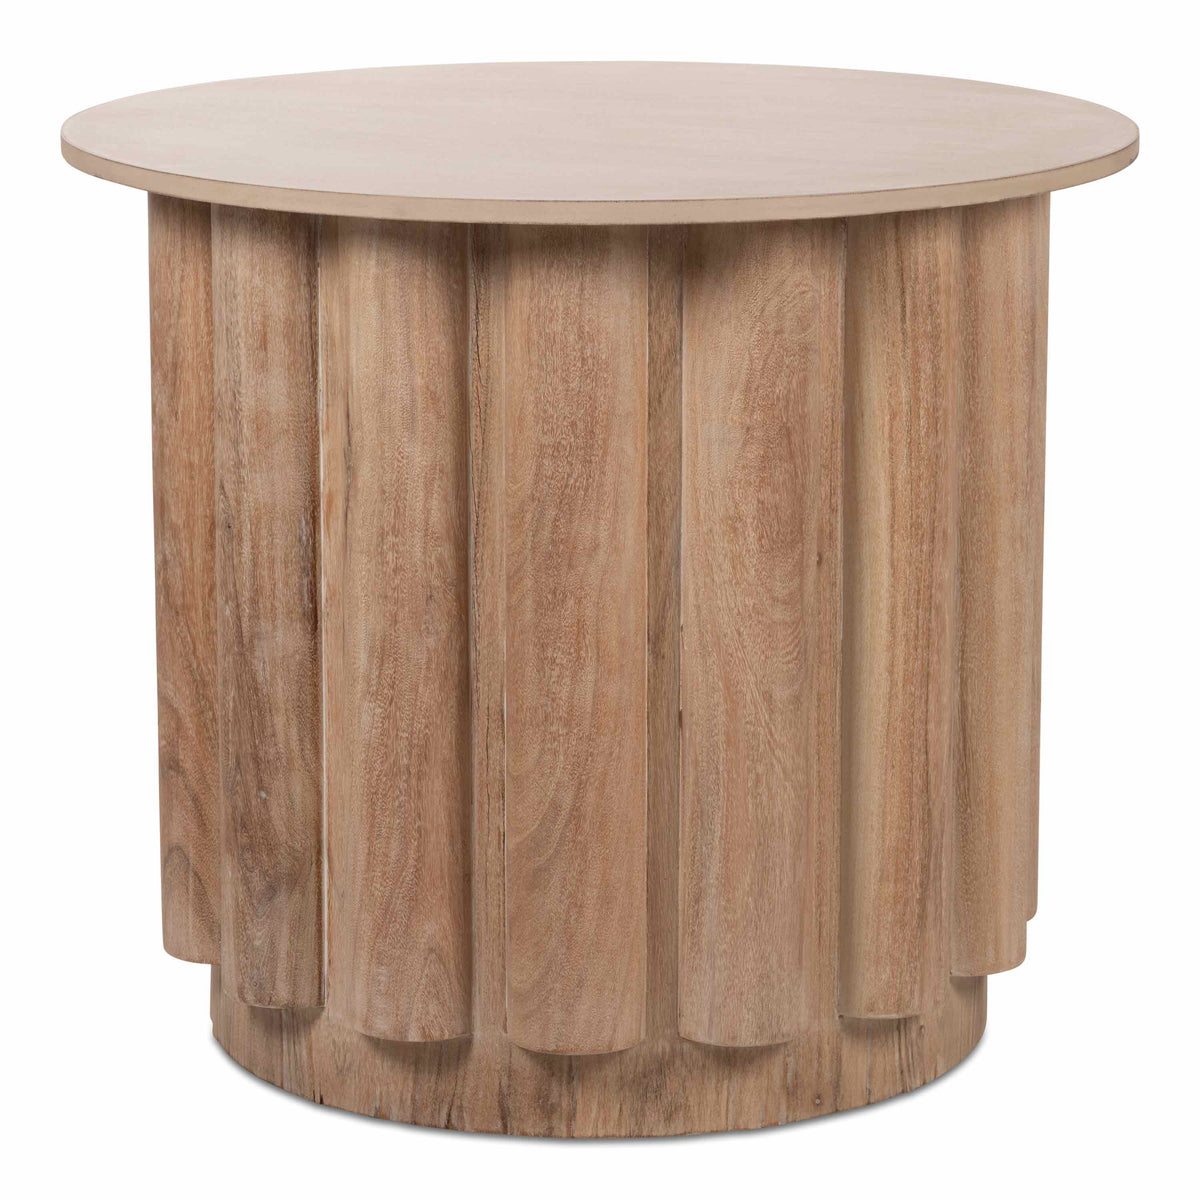 Eden Rock Table Base in Bleached Acacia